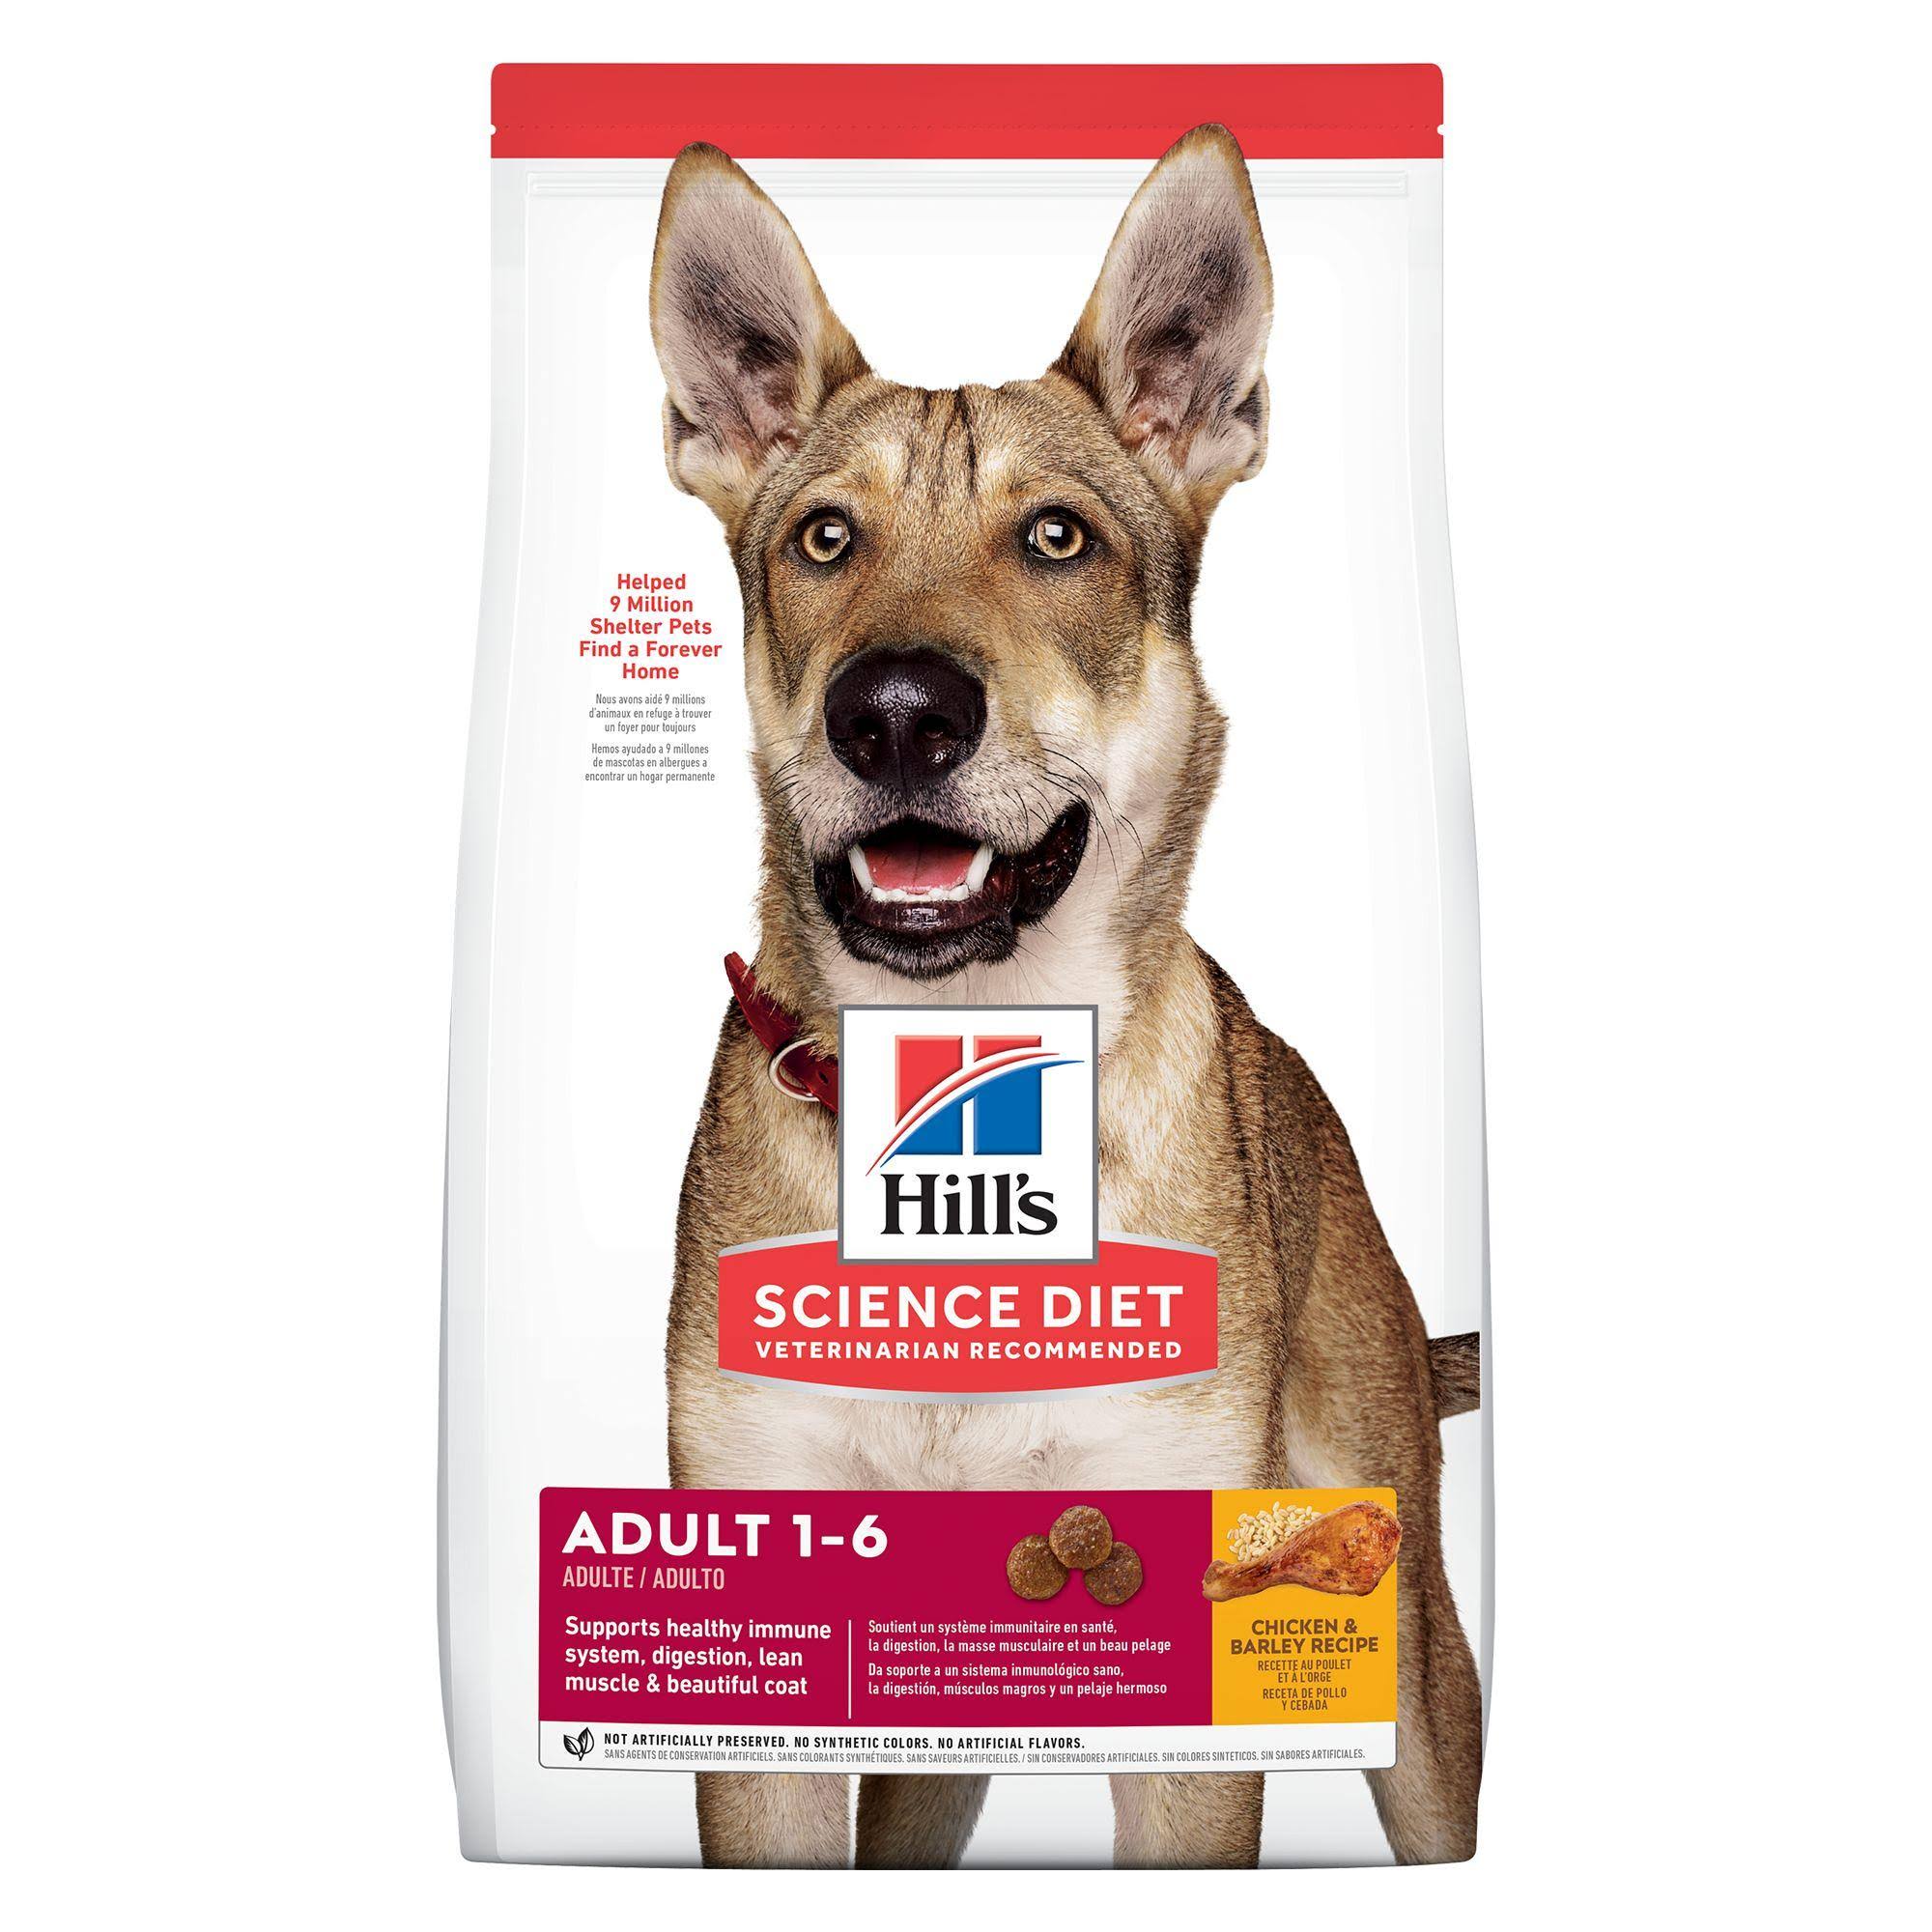 Hill's Science Diet Adult 1-6 Advanced Fitness Premium Natural Dog Food - Chicken Barley Recipe, 5lbs